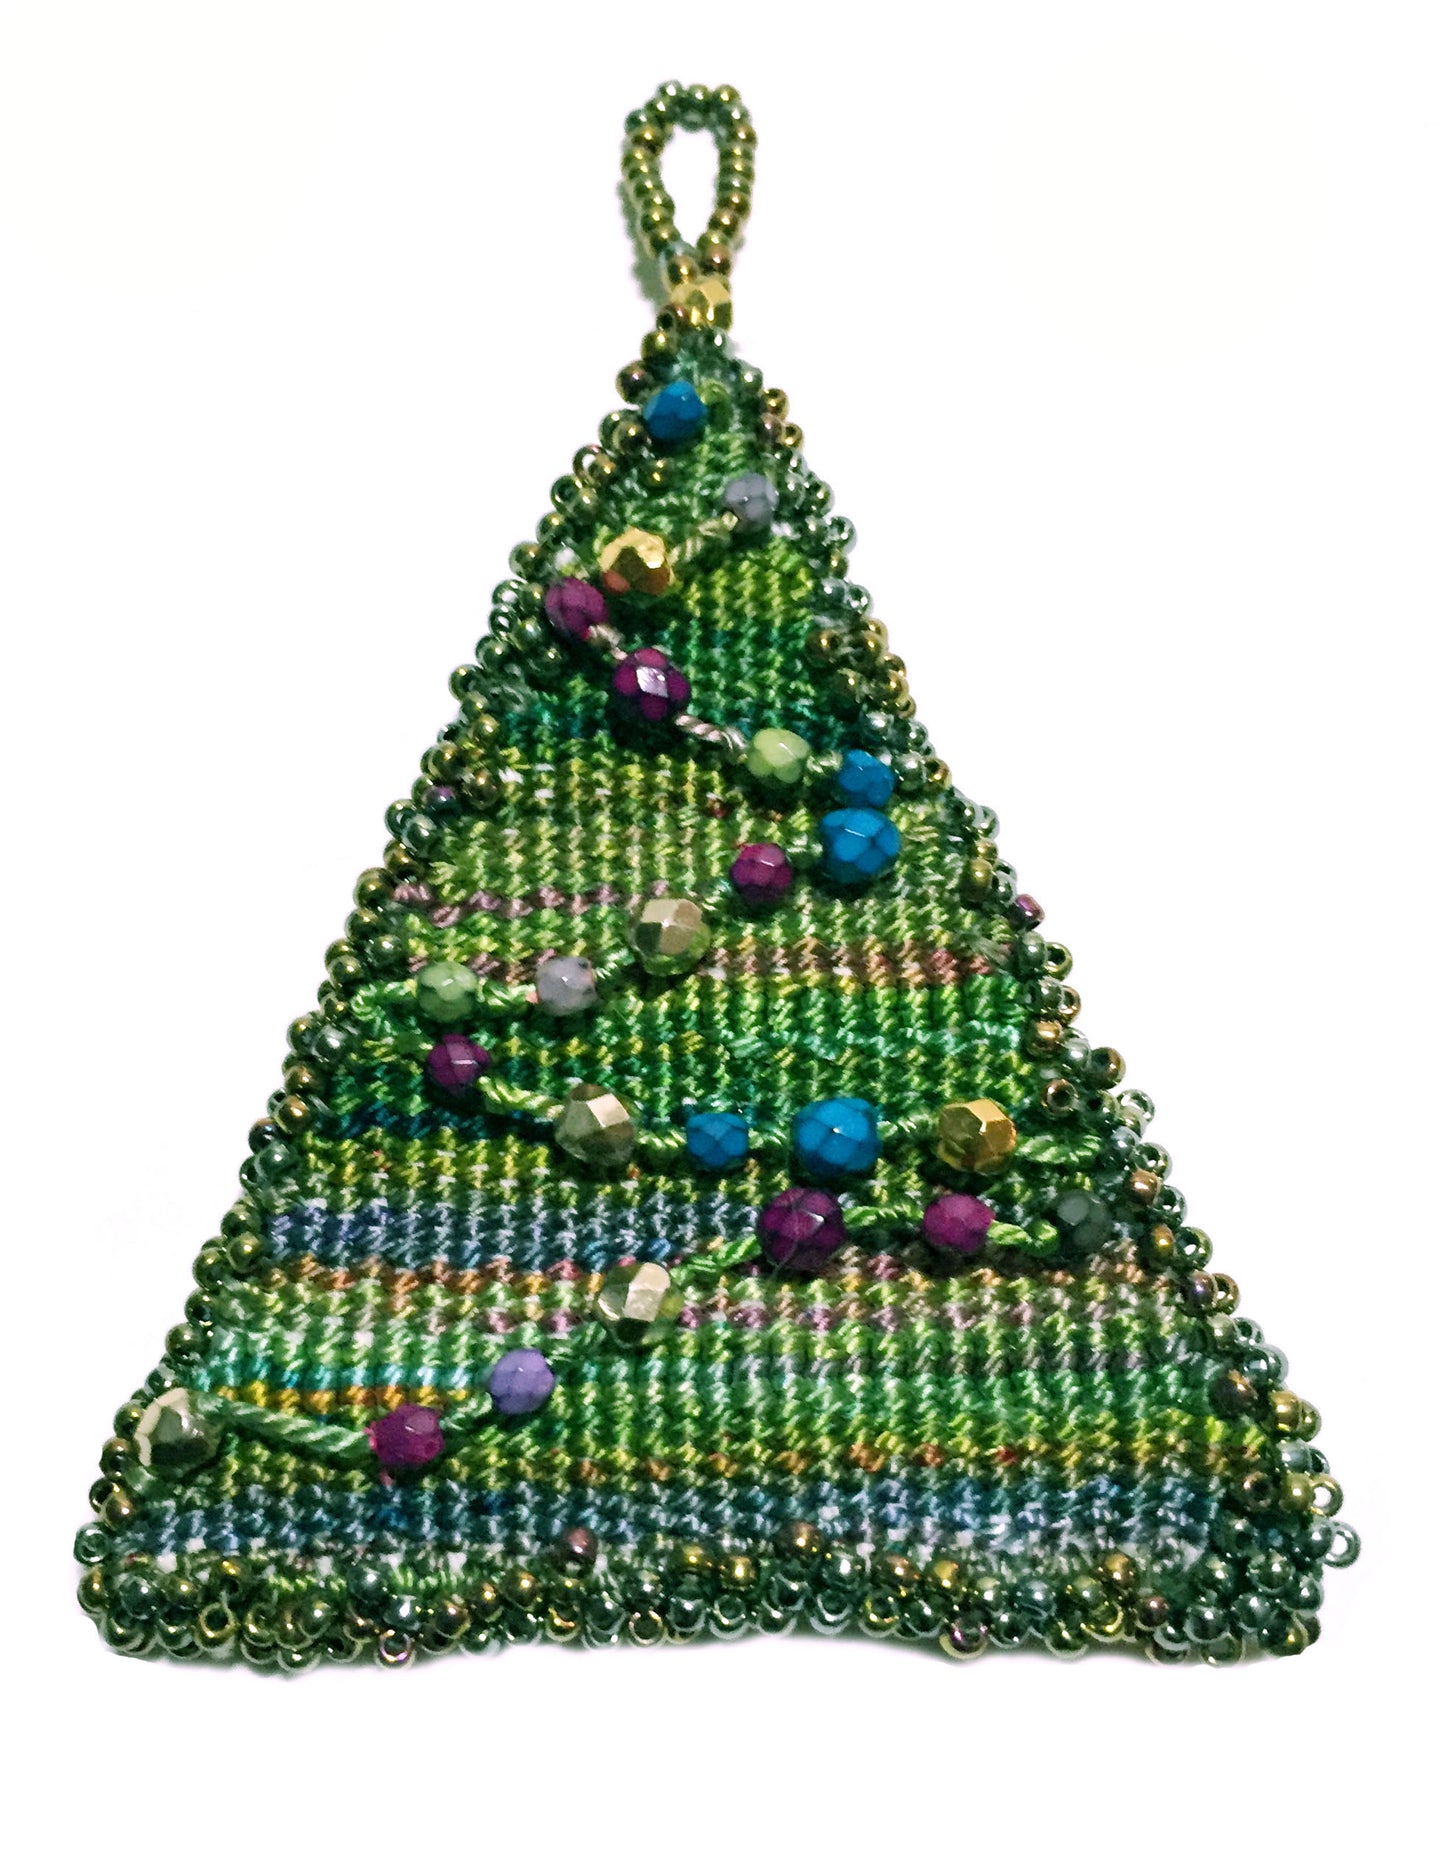 Free Project: Tapestry Tree Holiday Ornament